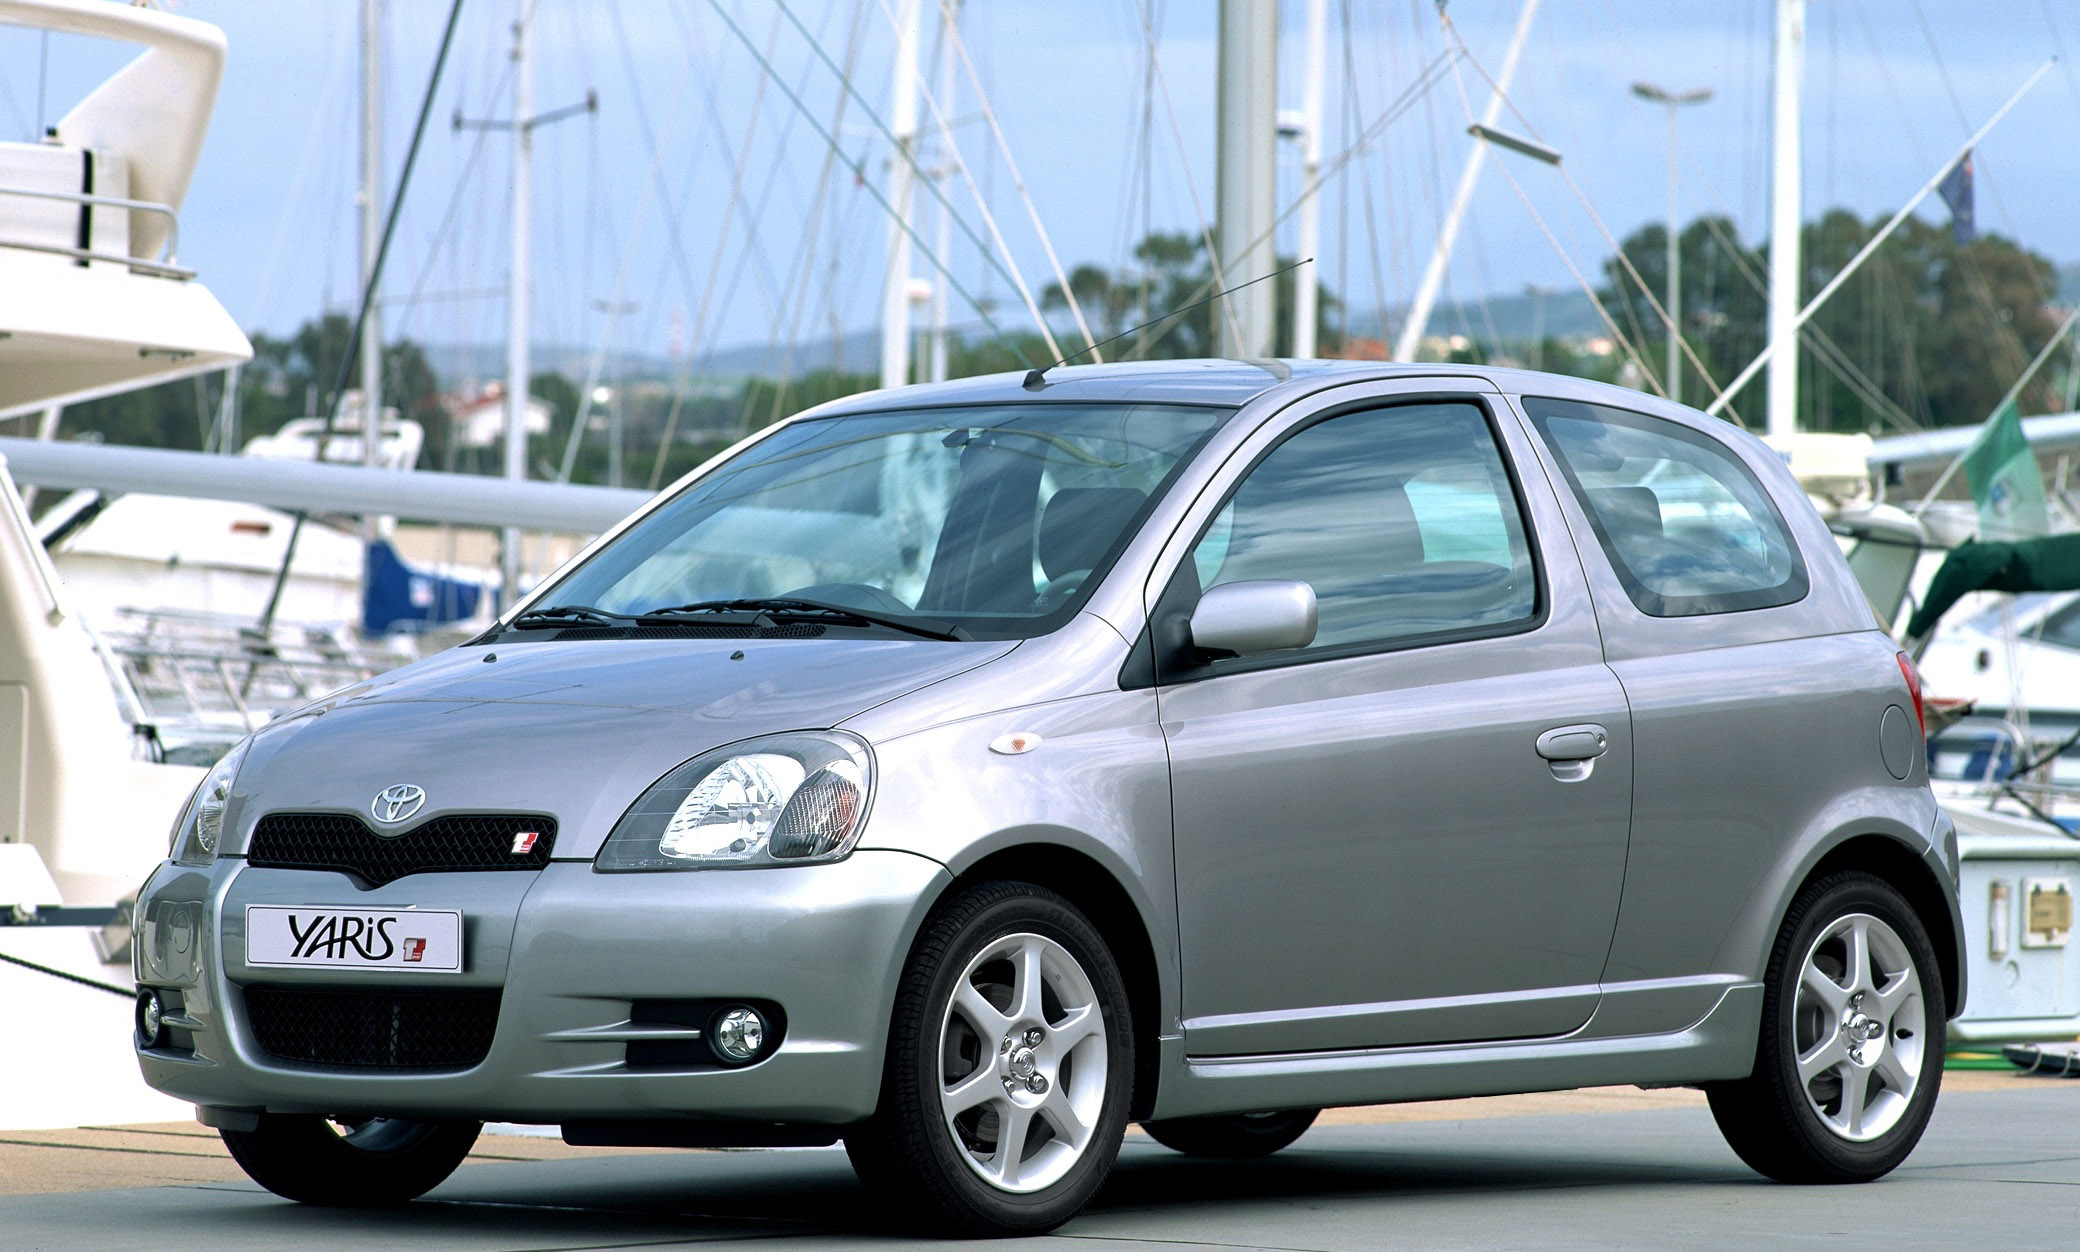 Toyota Yaris T Sport 2001 Picture 9 Of 13